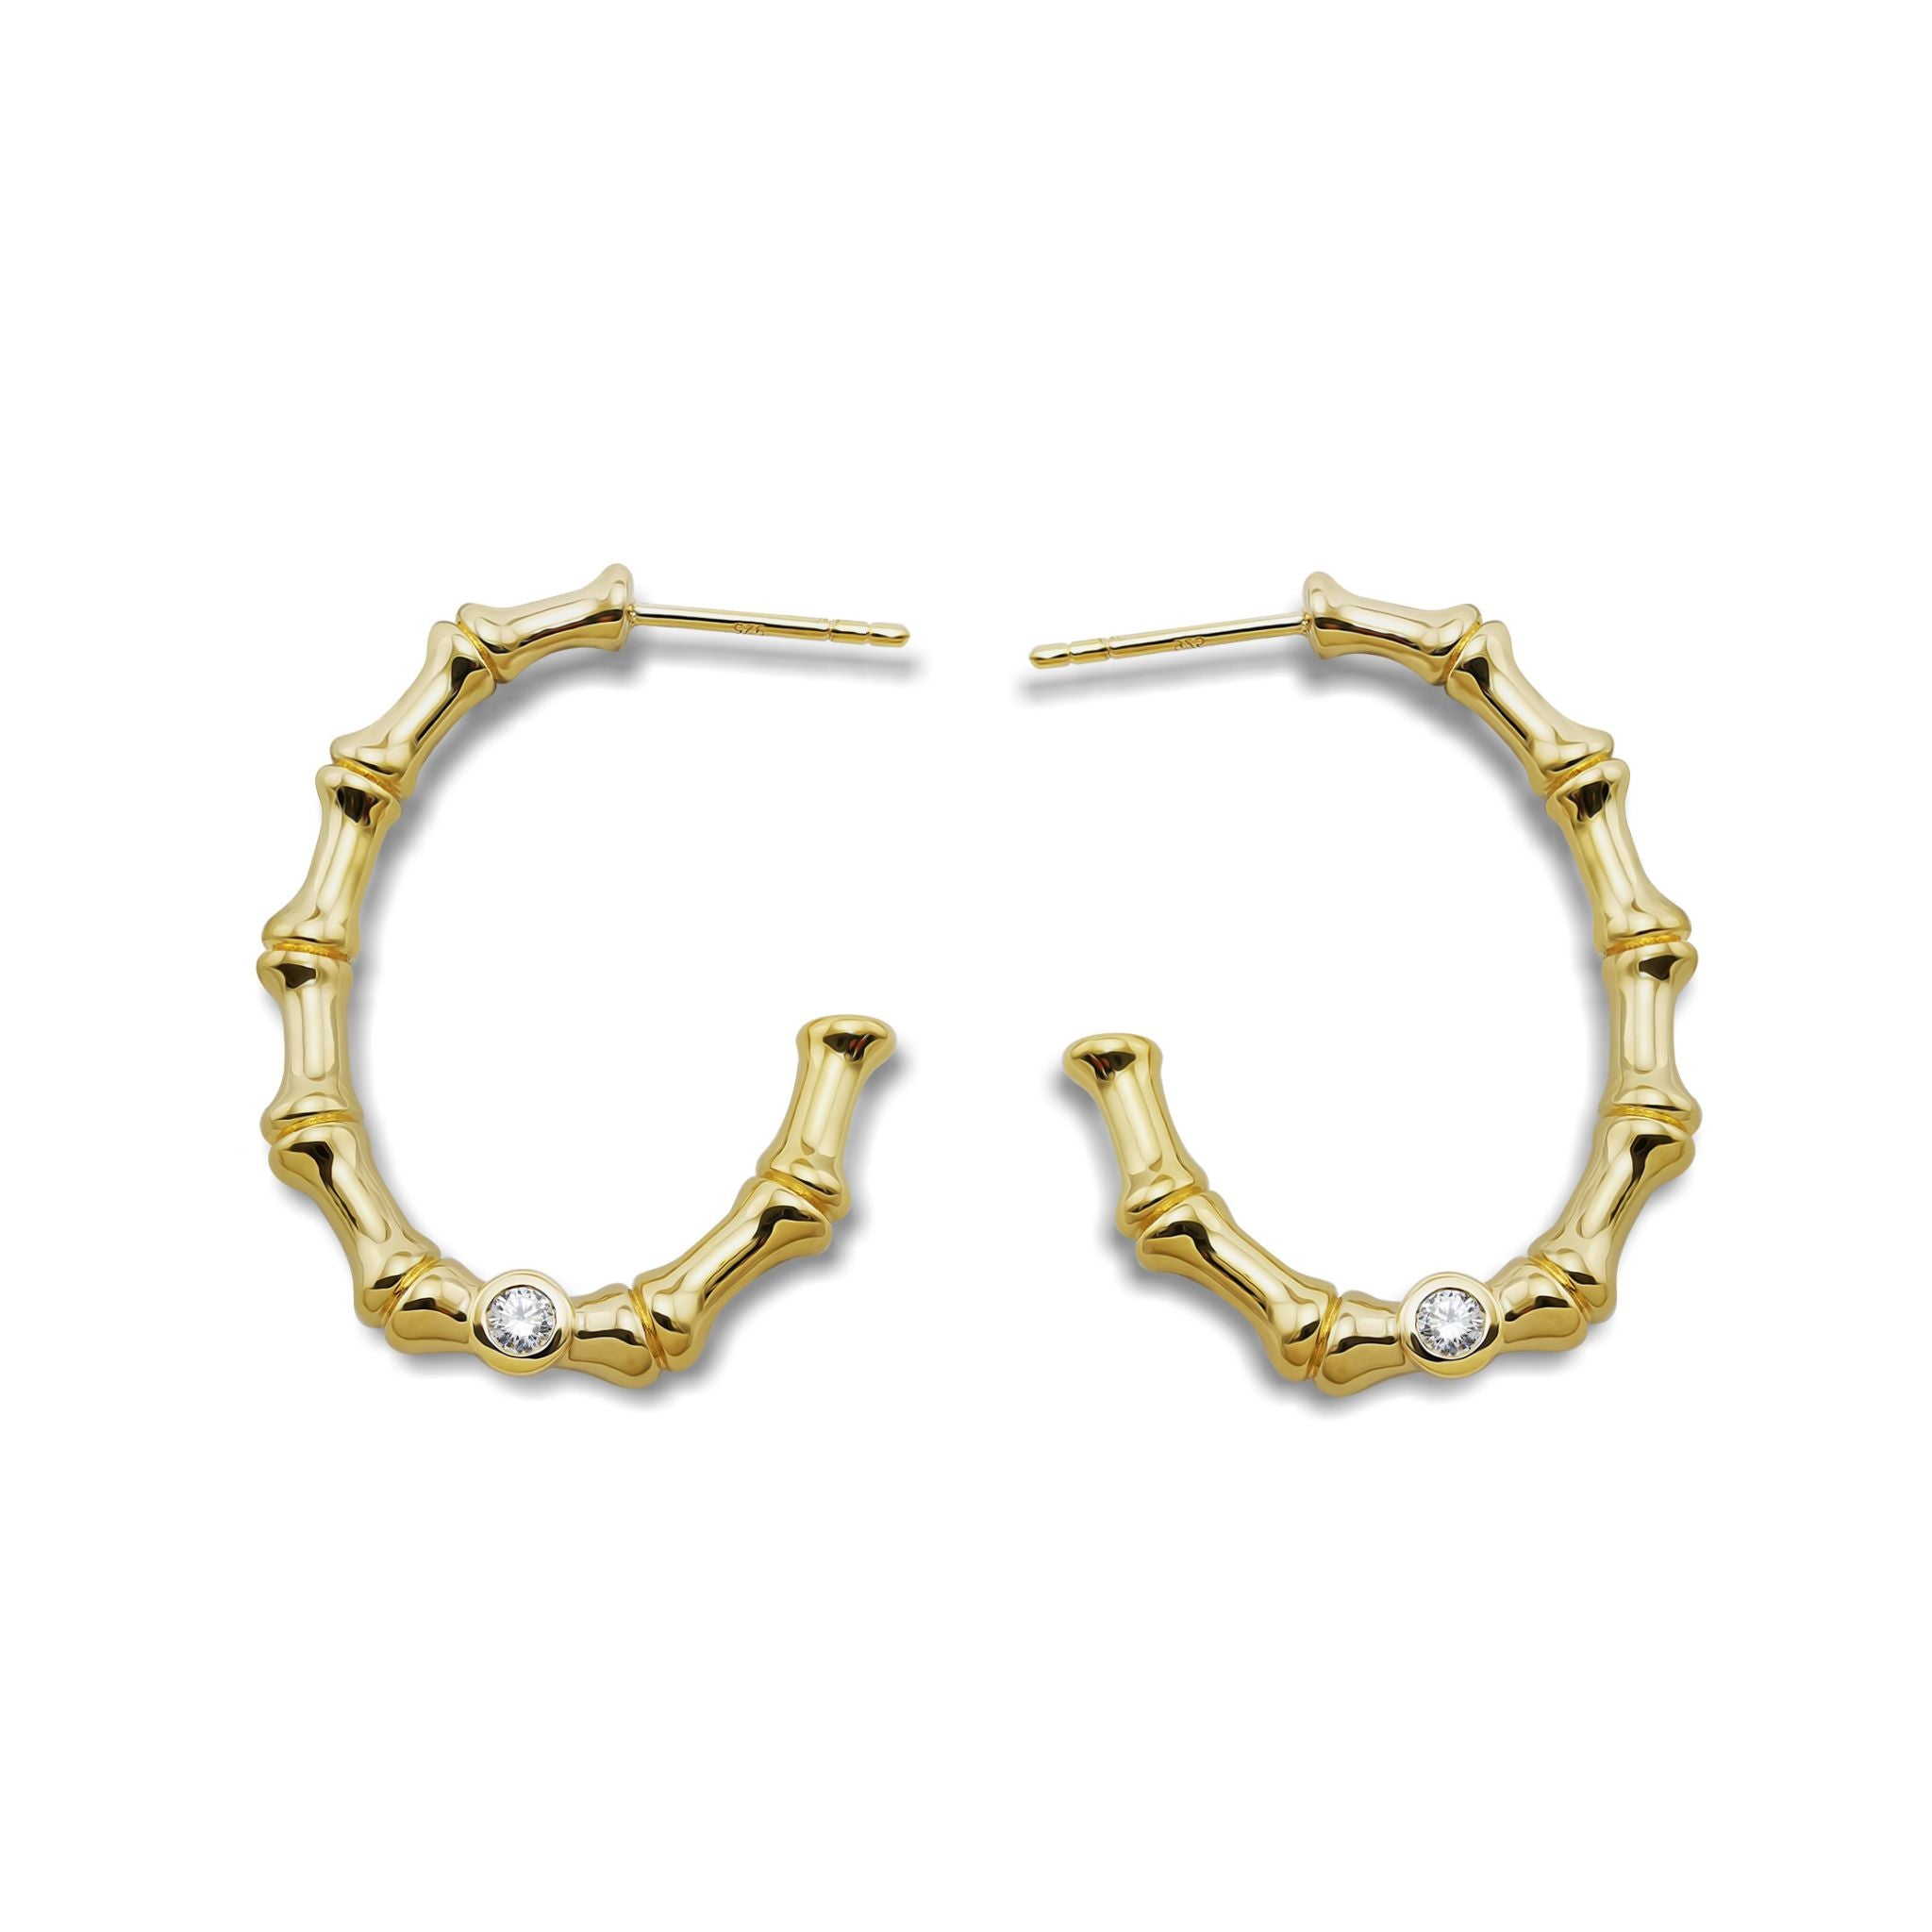 The Bamboo Hoops